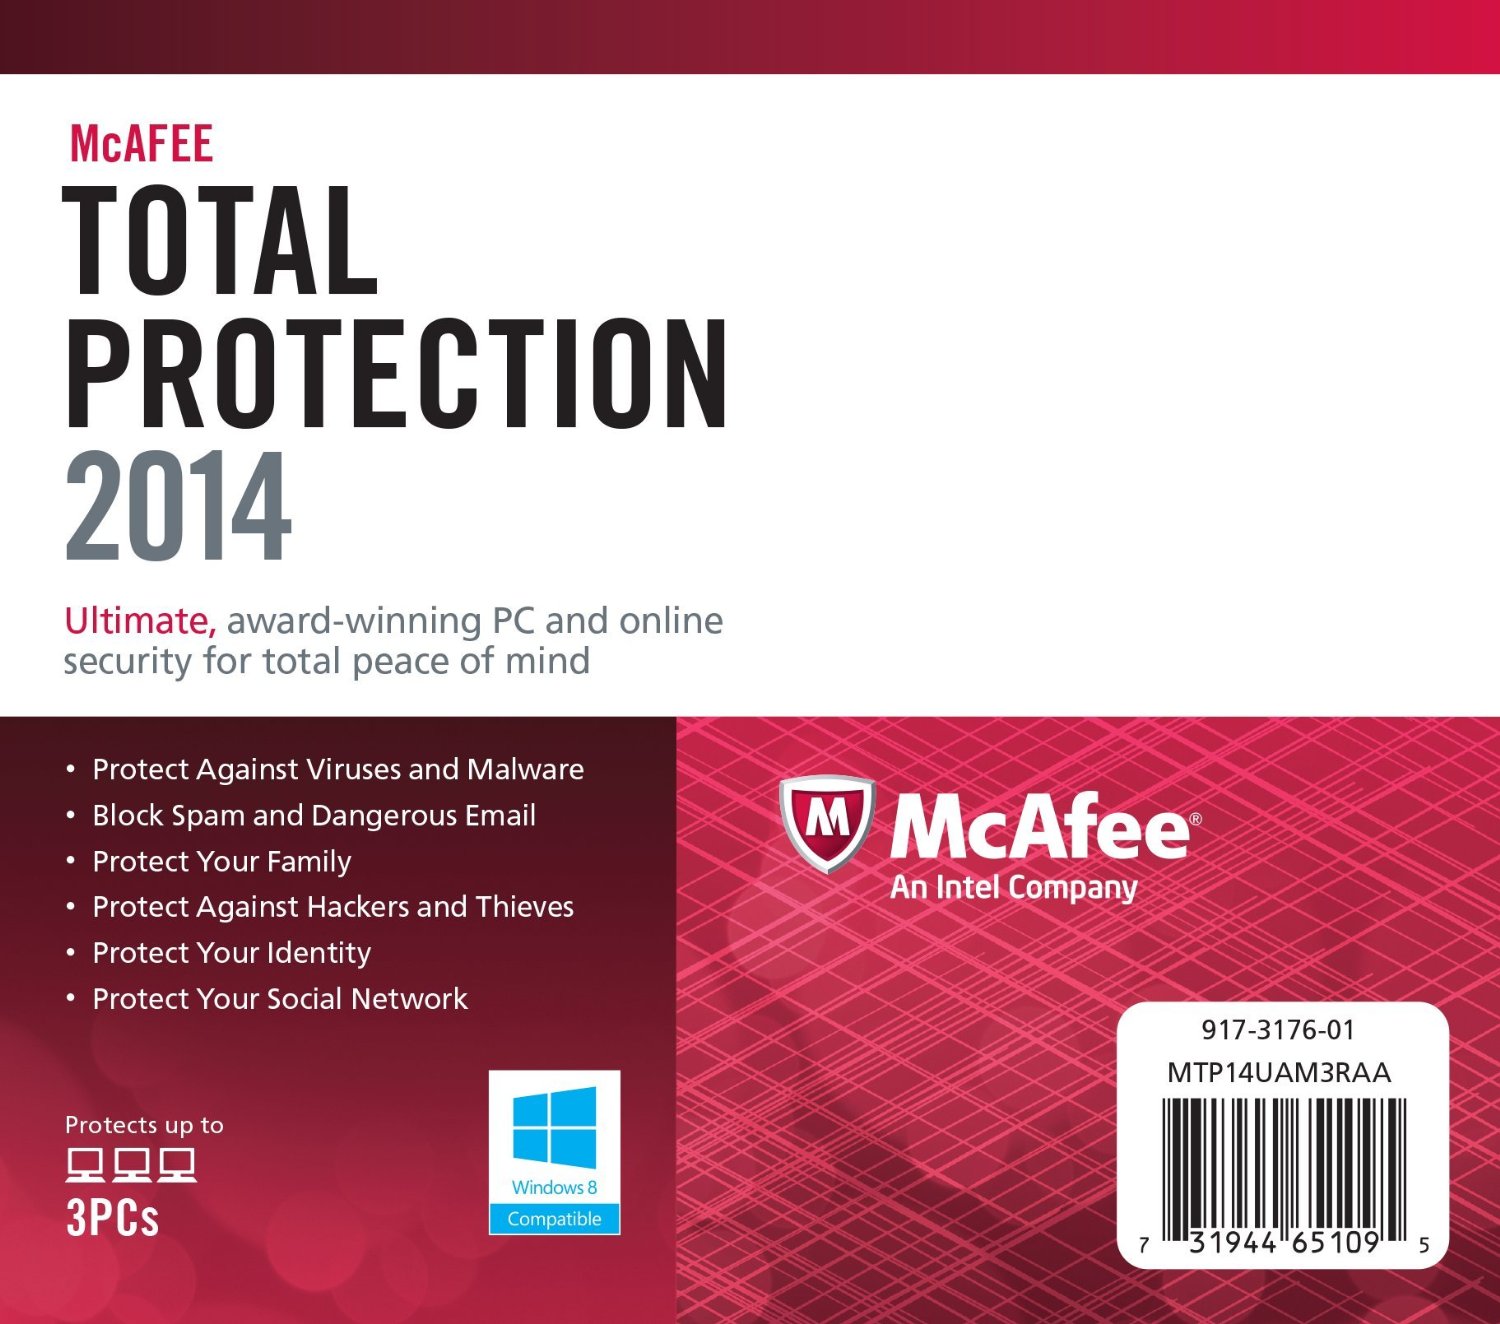 Mcafee mobile security log in